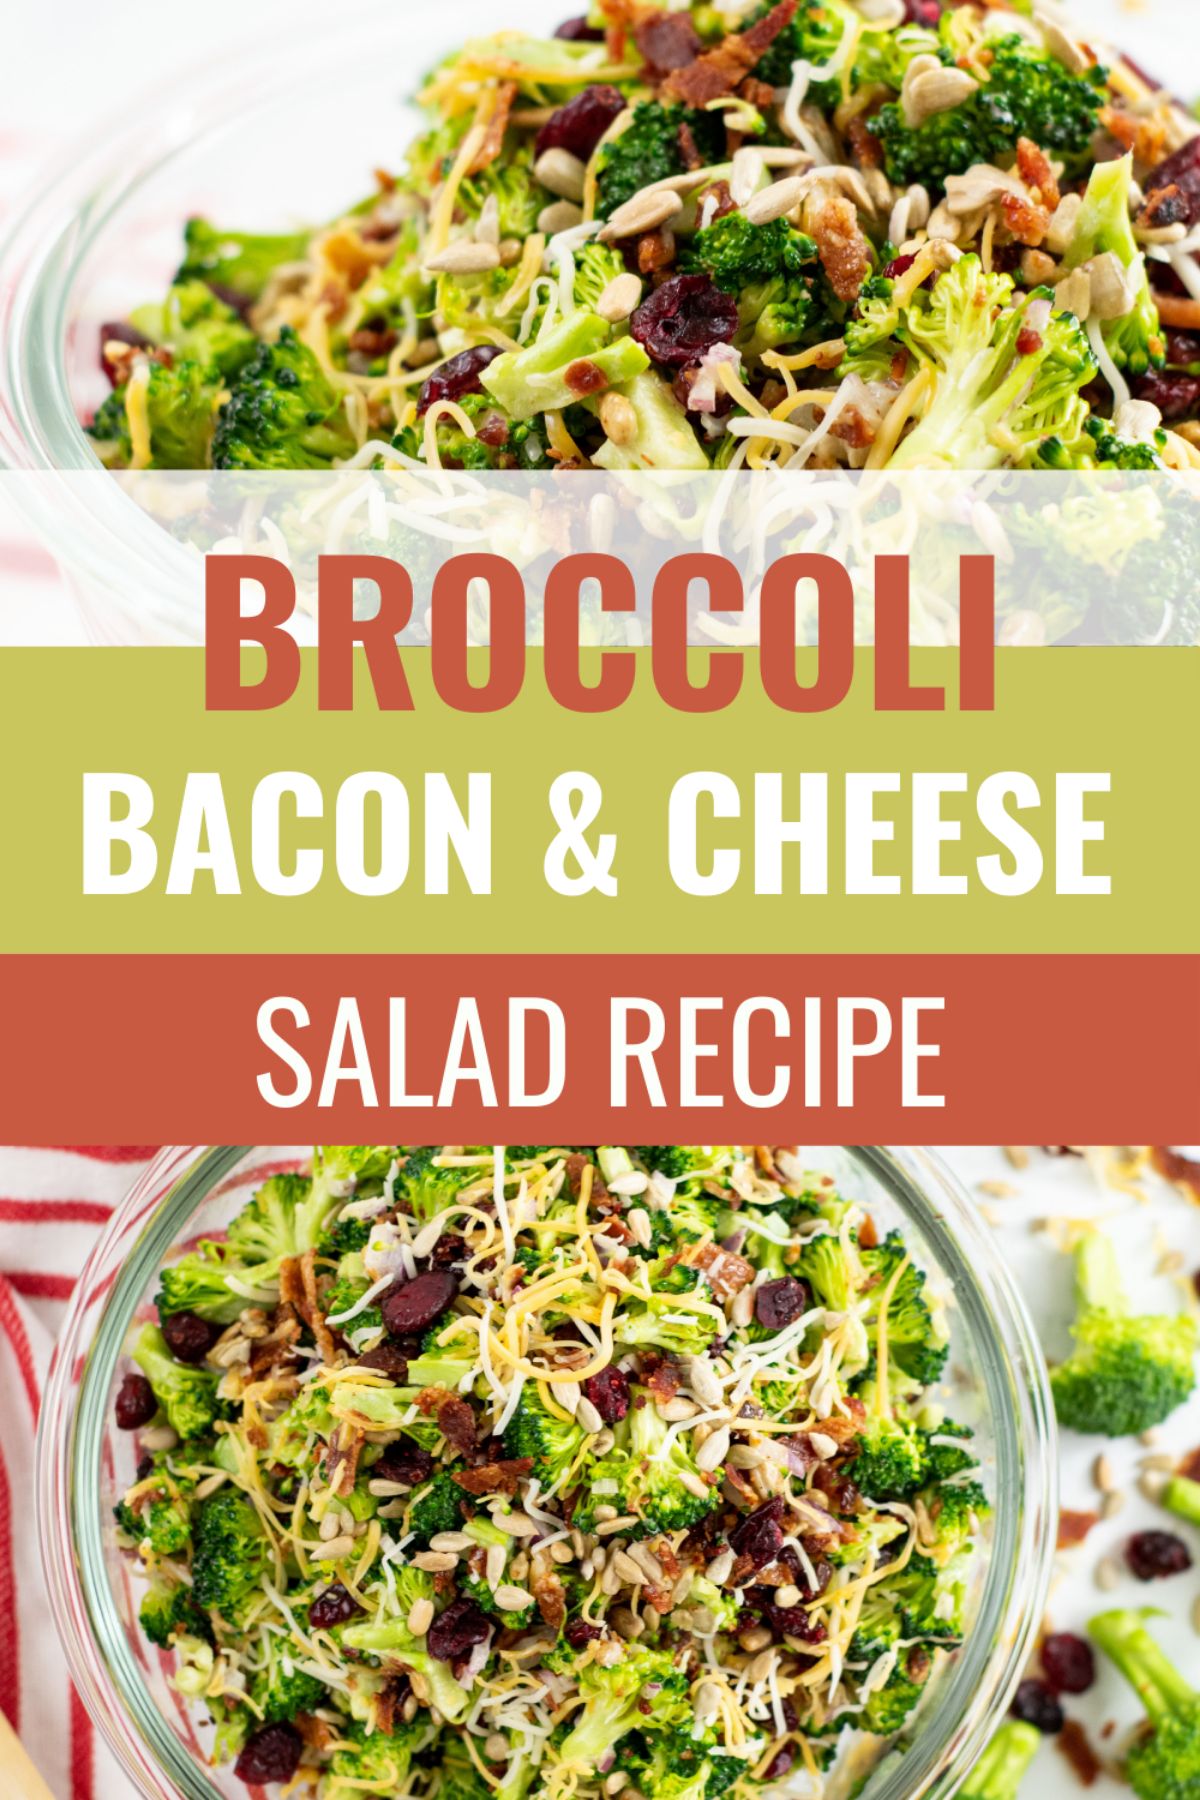 This Broccoli Bacon and Cheese Salad is anything but routine. With savory bacon and a tangy dressing, it’s perfect for any picnic or potluck. #broccolibaconandcheesesalad #salad #broccolisalad #saladrecipes via @wondermomwannab